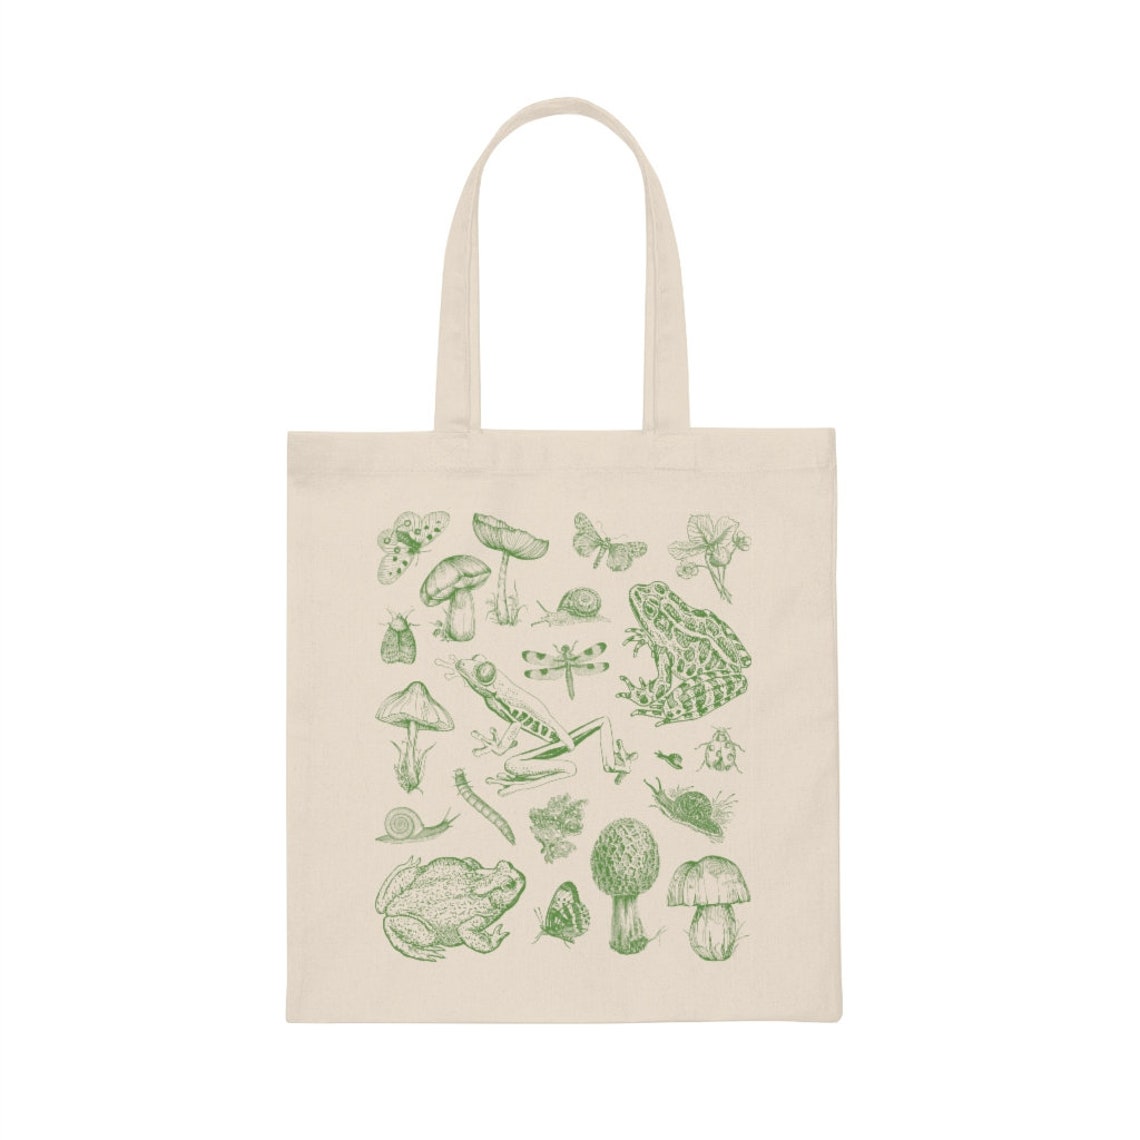 Goblincore Tote Frog Tote Bag Sustainable Tote Canvas Tote Bag - Etsy